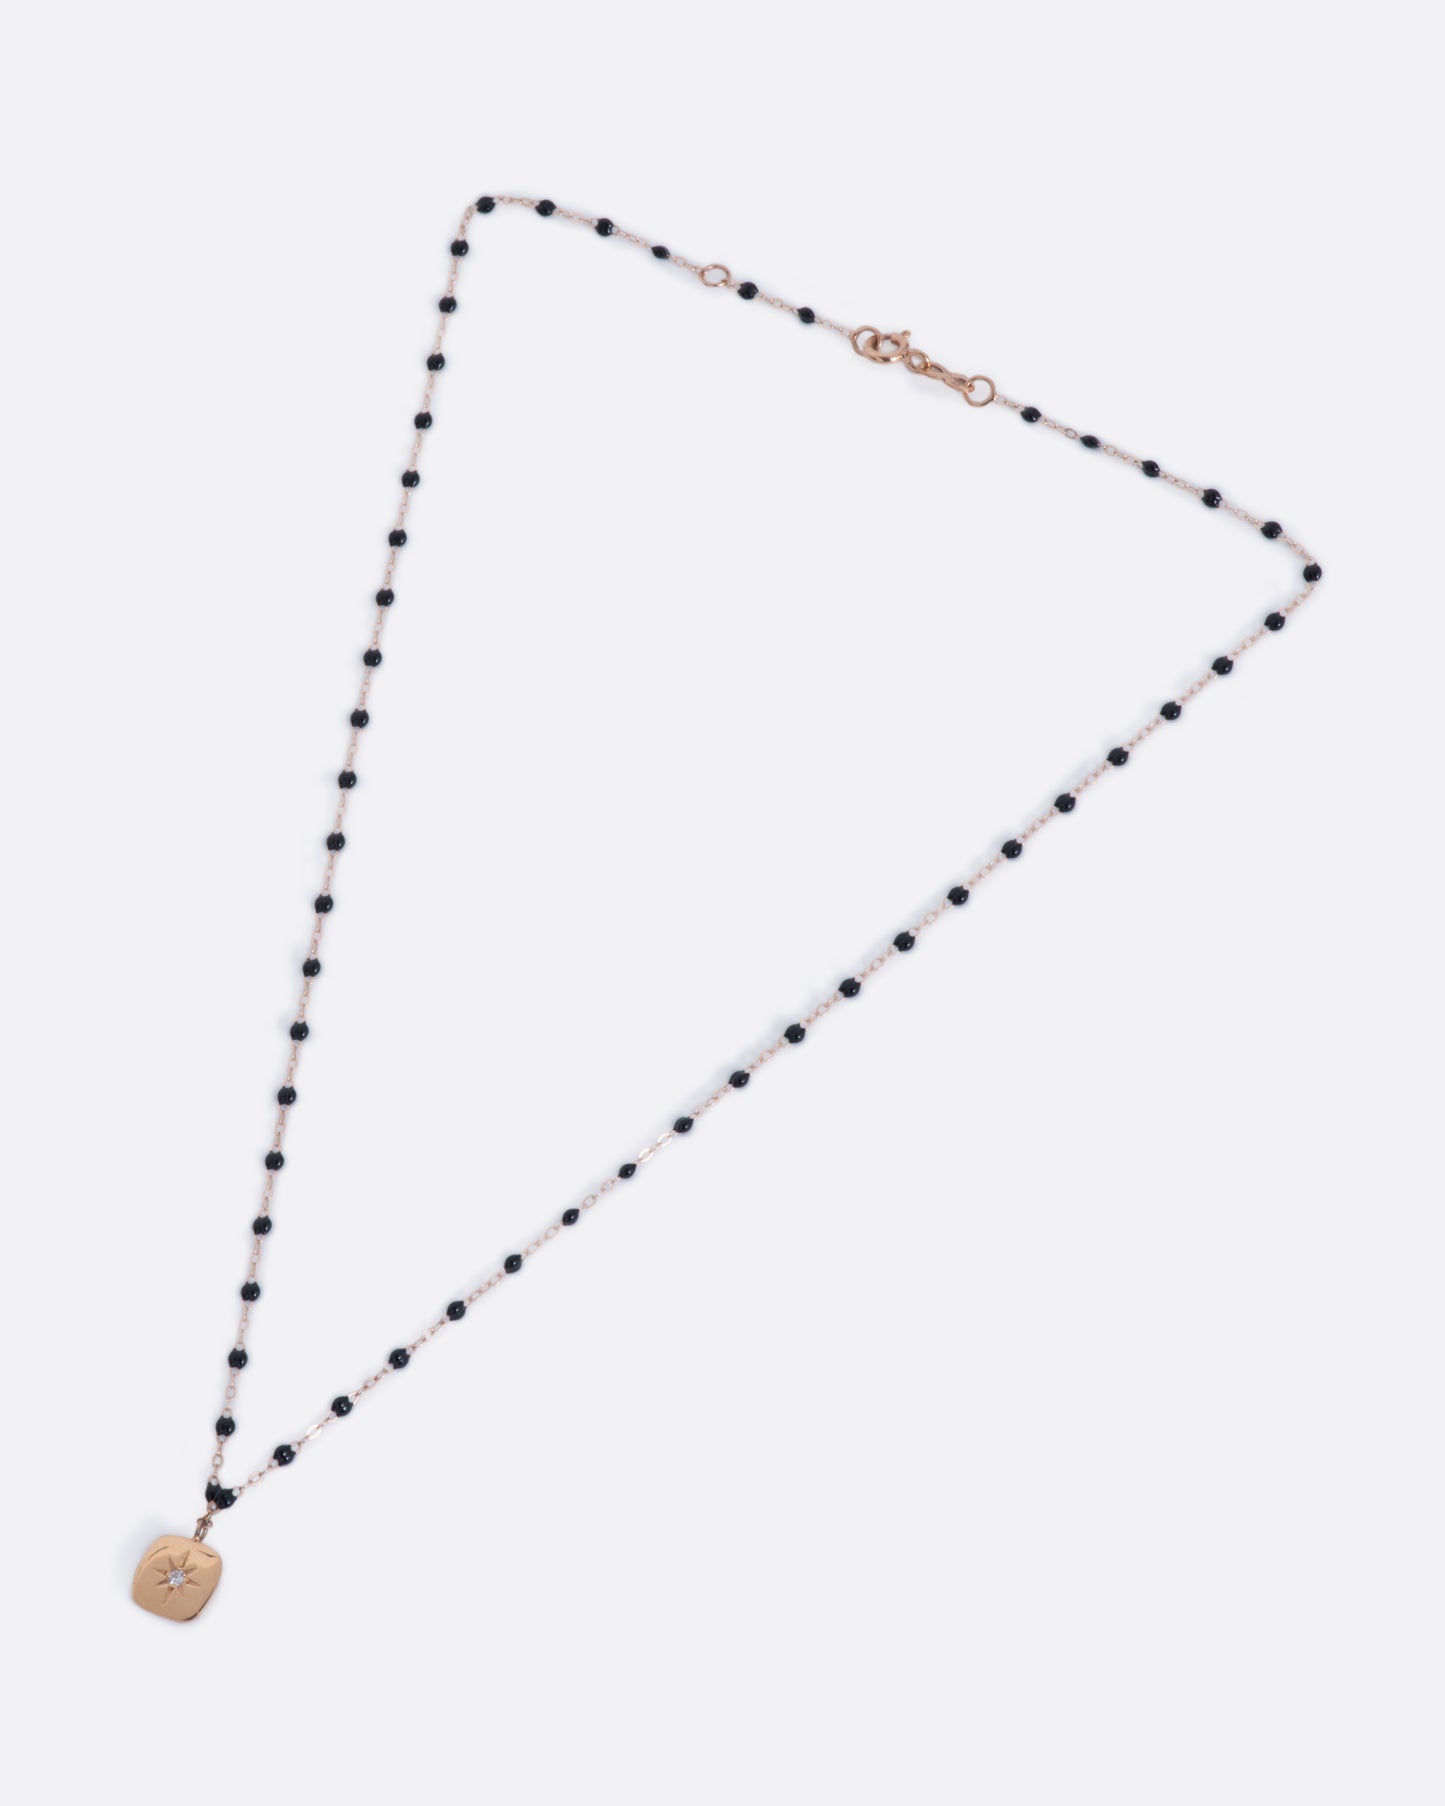 A classic rose gold Gigi Clozeau necklace with black resin beads and a square tag pendant, with a star-set diamond at its center